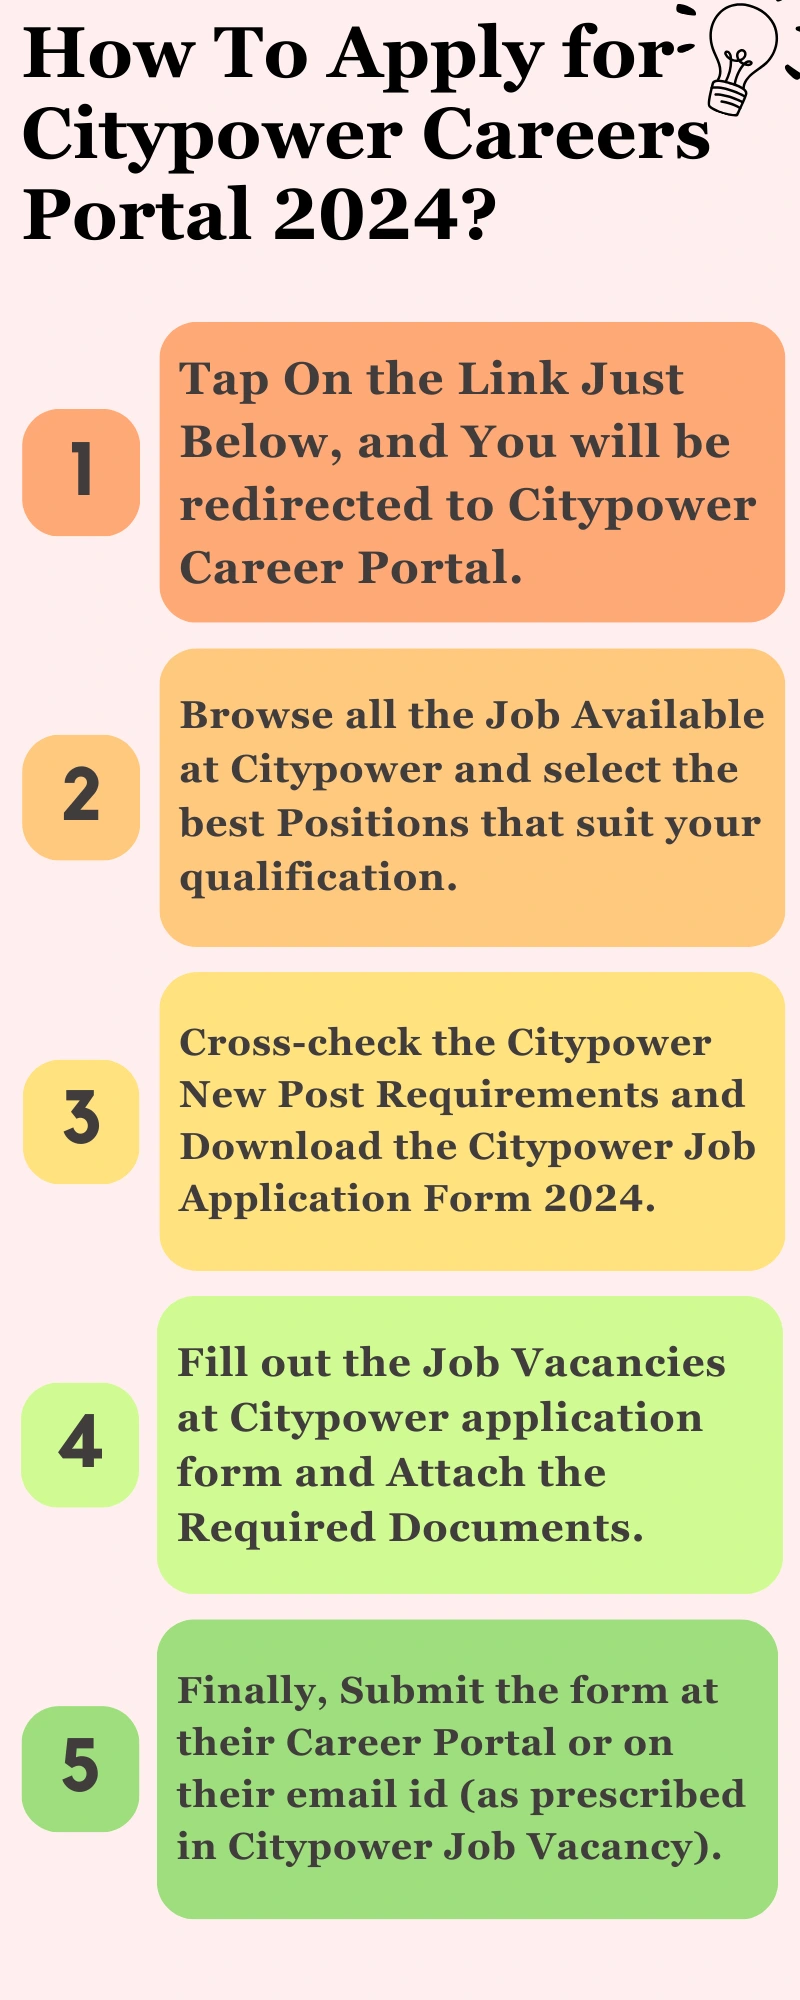 How To Apply for Citypower Careers Portal 2024?